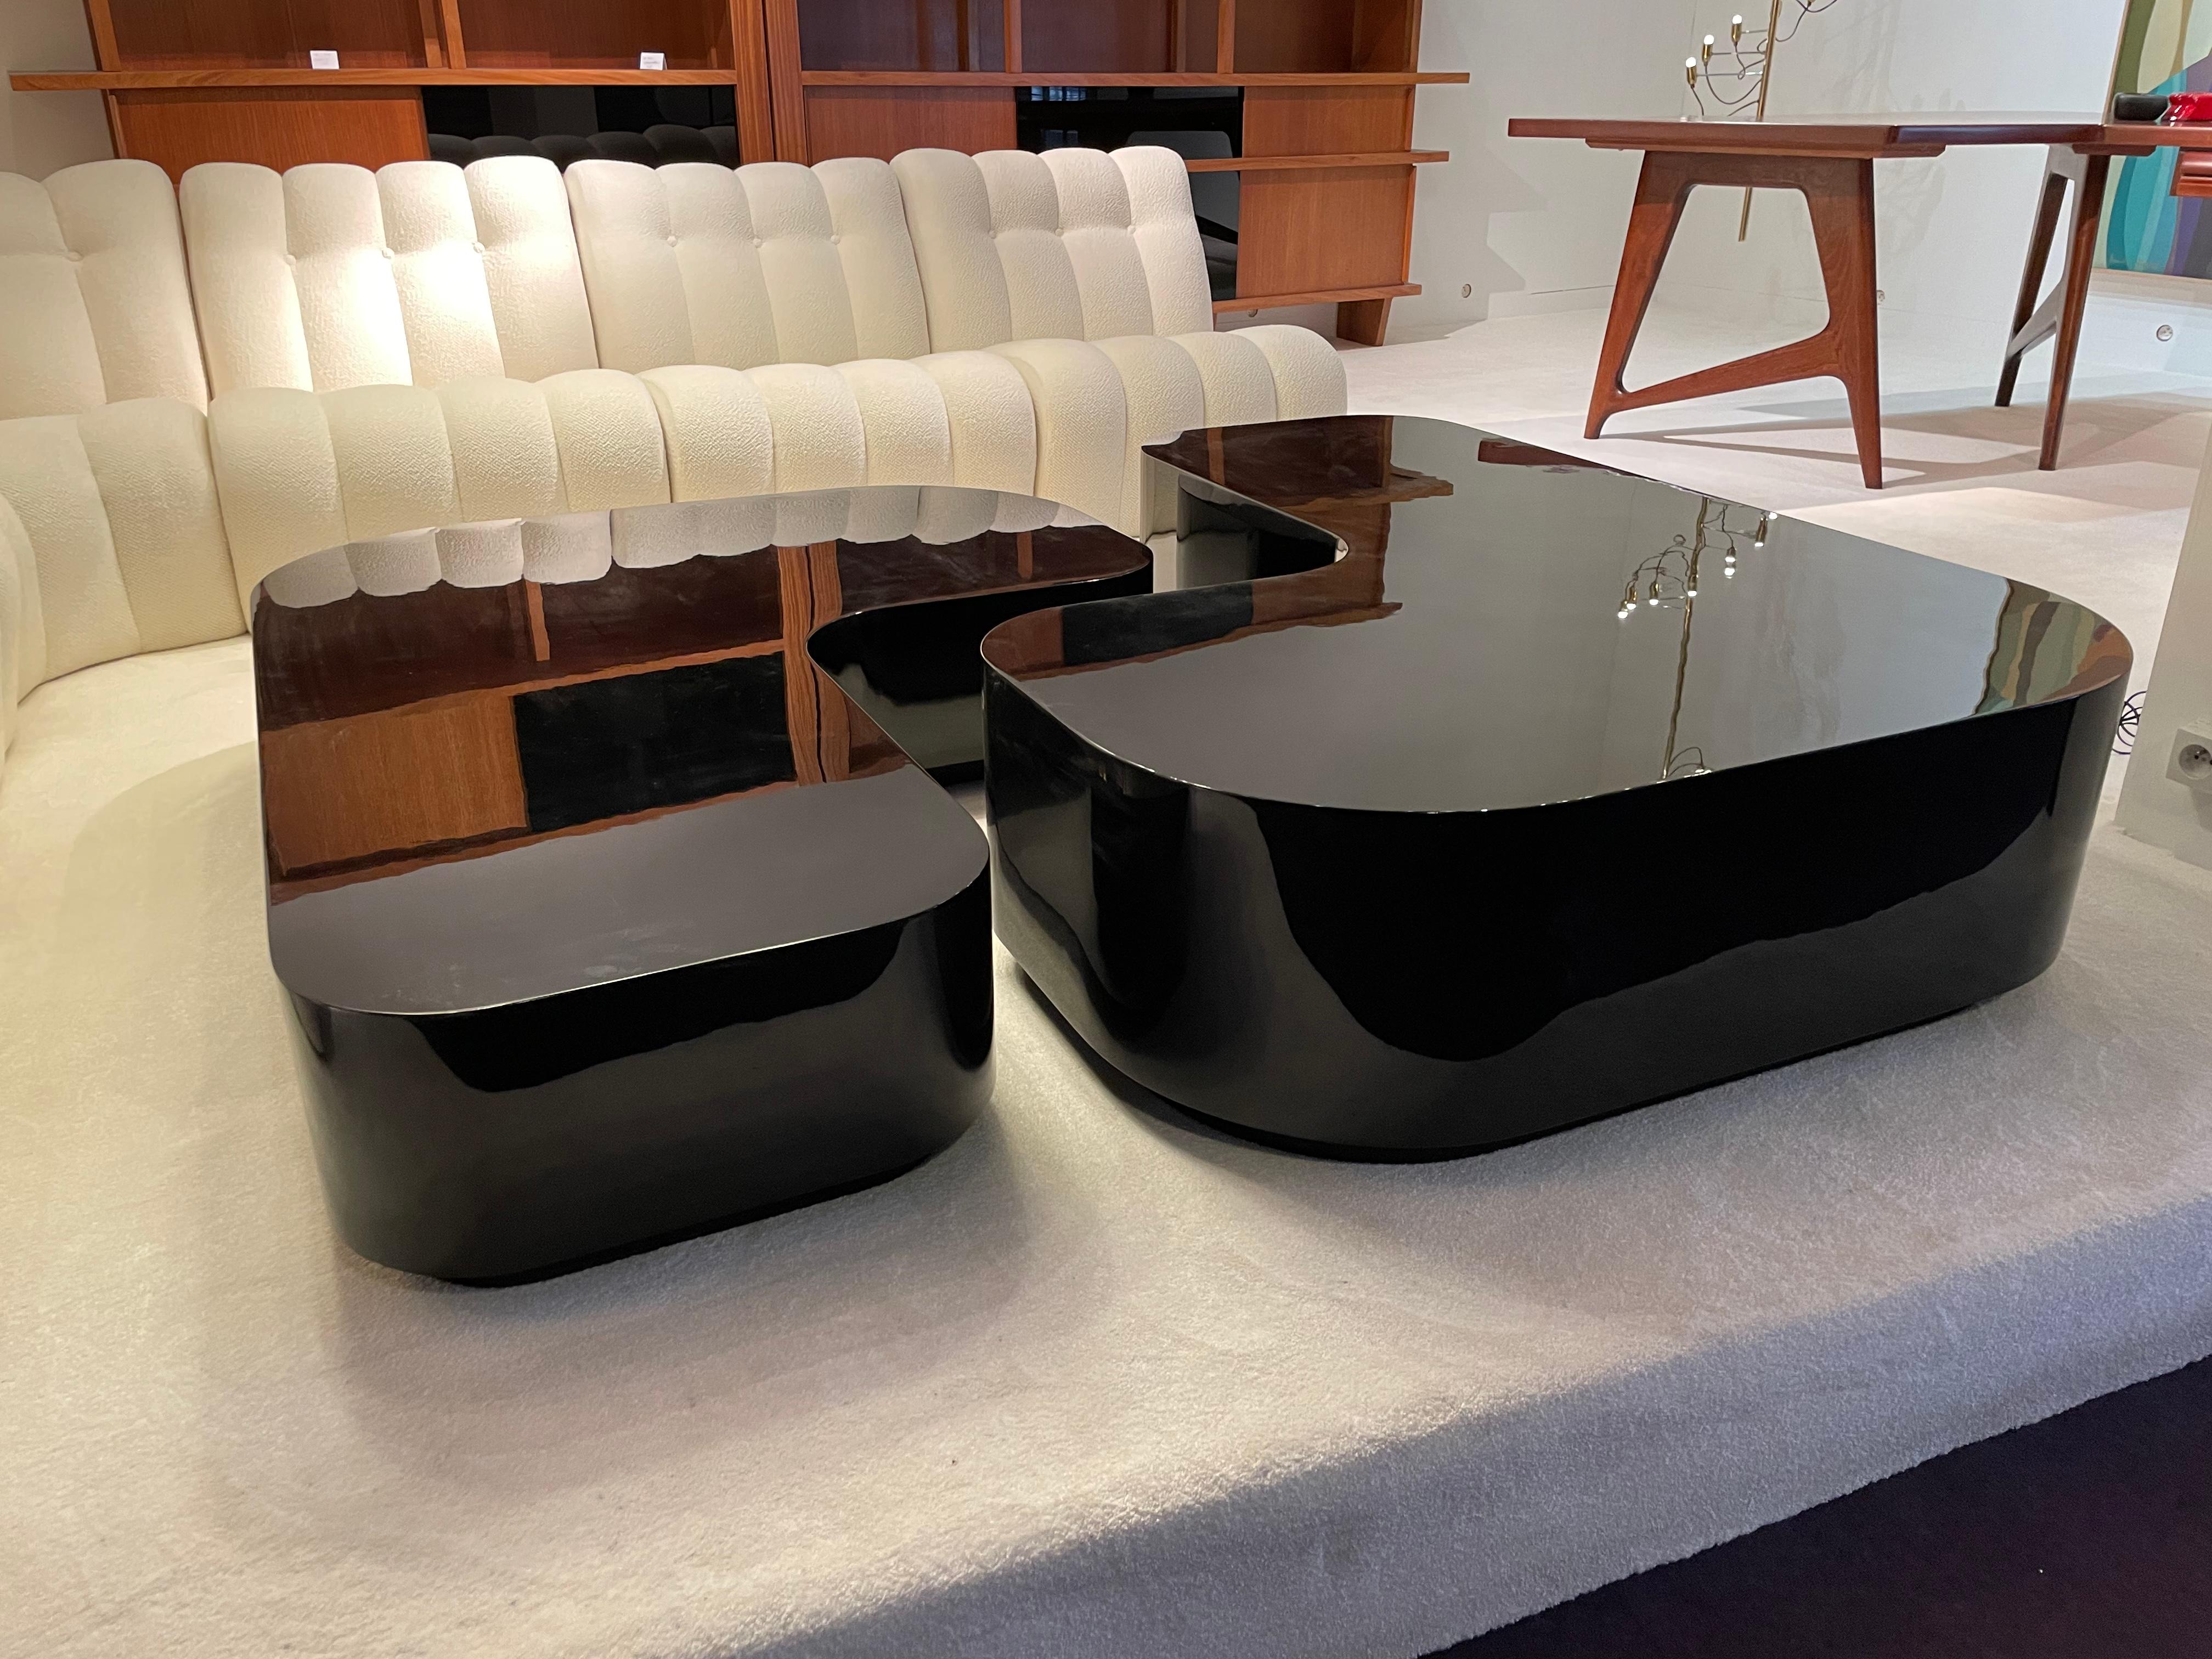 Alberto Pinto
Decorator Two large coffee tables
 can form only one. Events
 in lacquered wood, one turquoise, the other
 chocolate, and each resting on a base
 set back
 Each table: 37 x 145 x 111 cm.